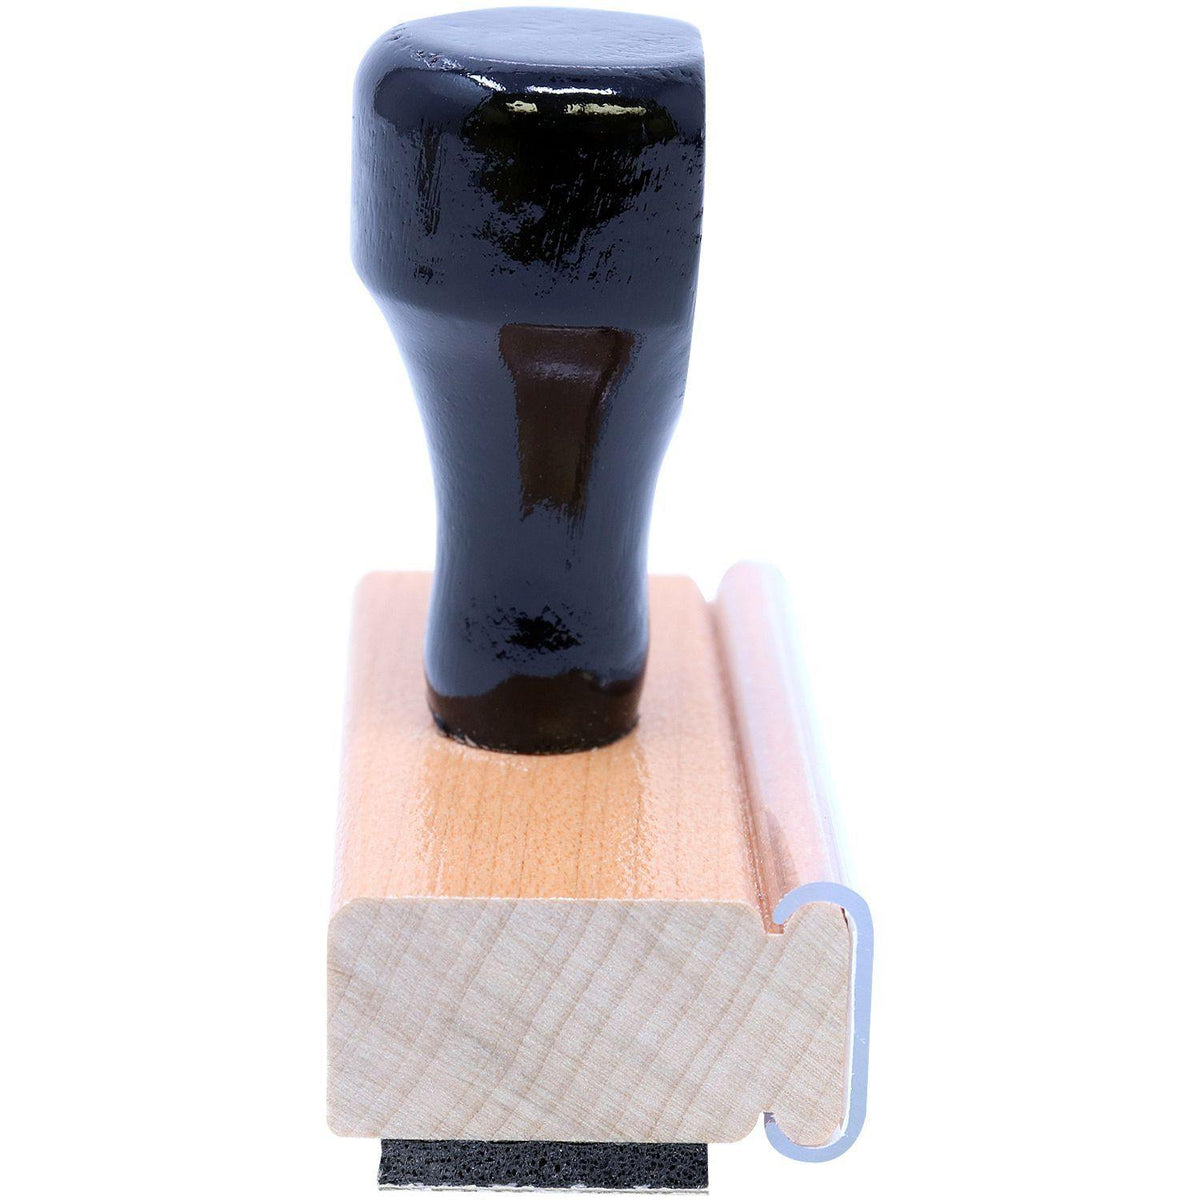 Refused Rubber Stamp - Engineer Seal Stamps - Brand_Acorn, Impression Size_Small, Stamp Type_Regular Stamp, Type of Use_General, Type of Use_Office, Type of Use_Postal &amp; Mailing